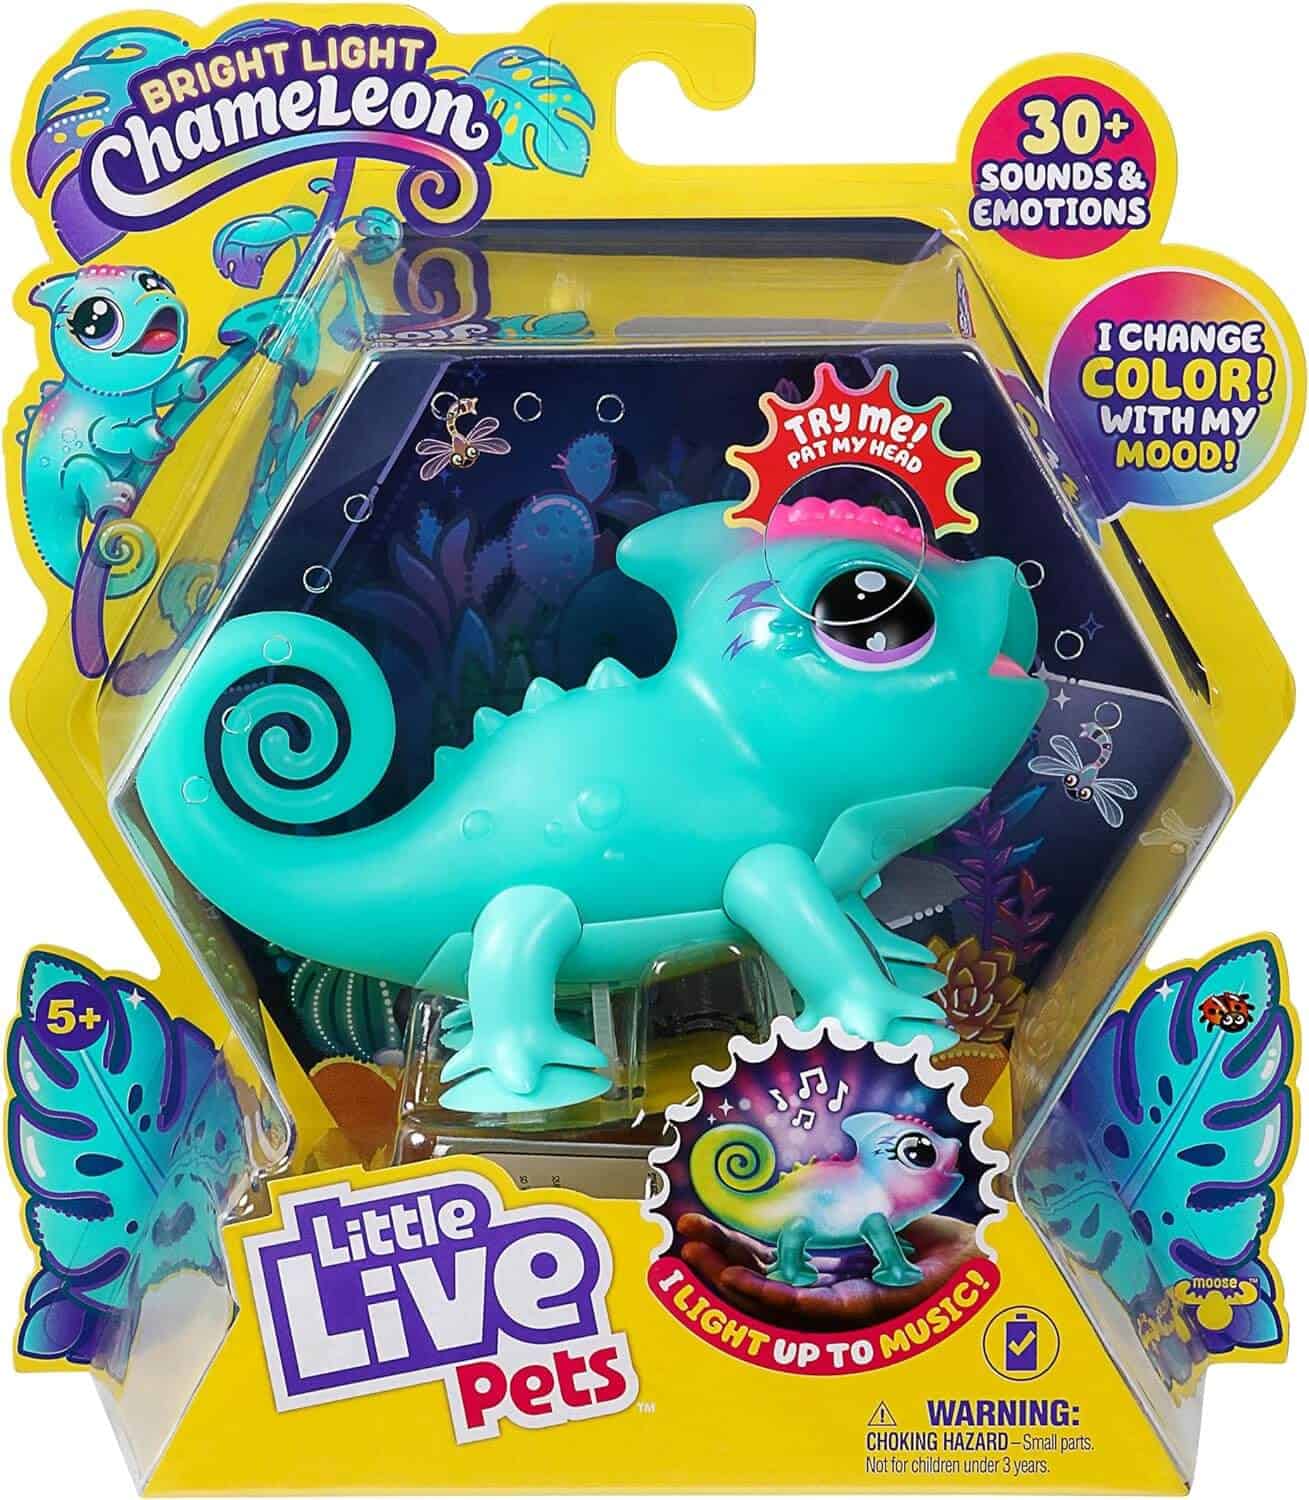 ideas for christmas gifts: Sunny The Bright Light Chameleon 